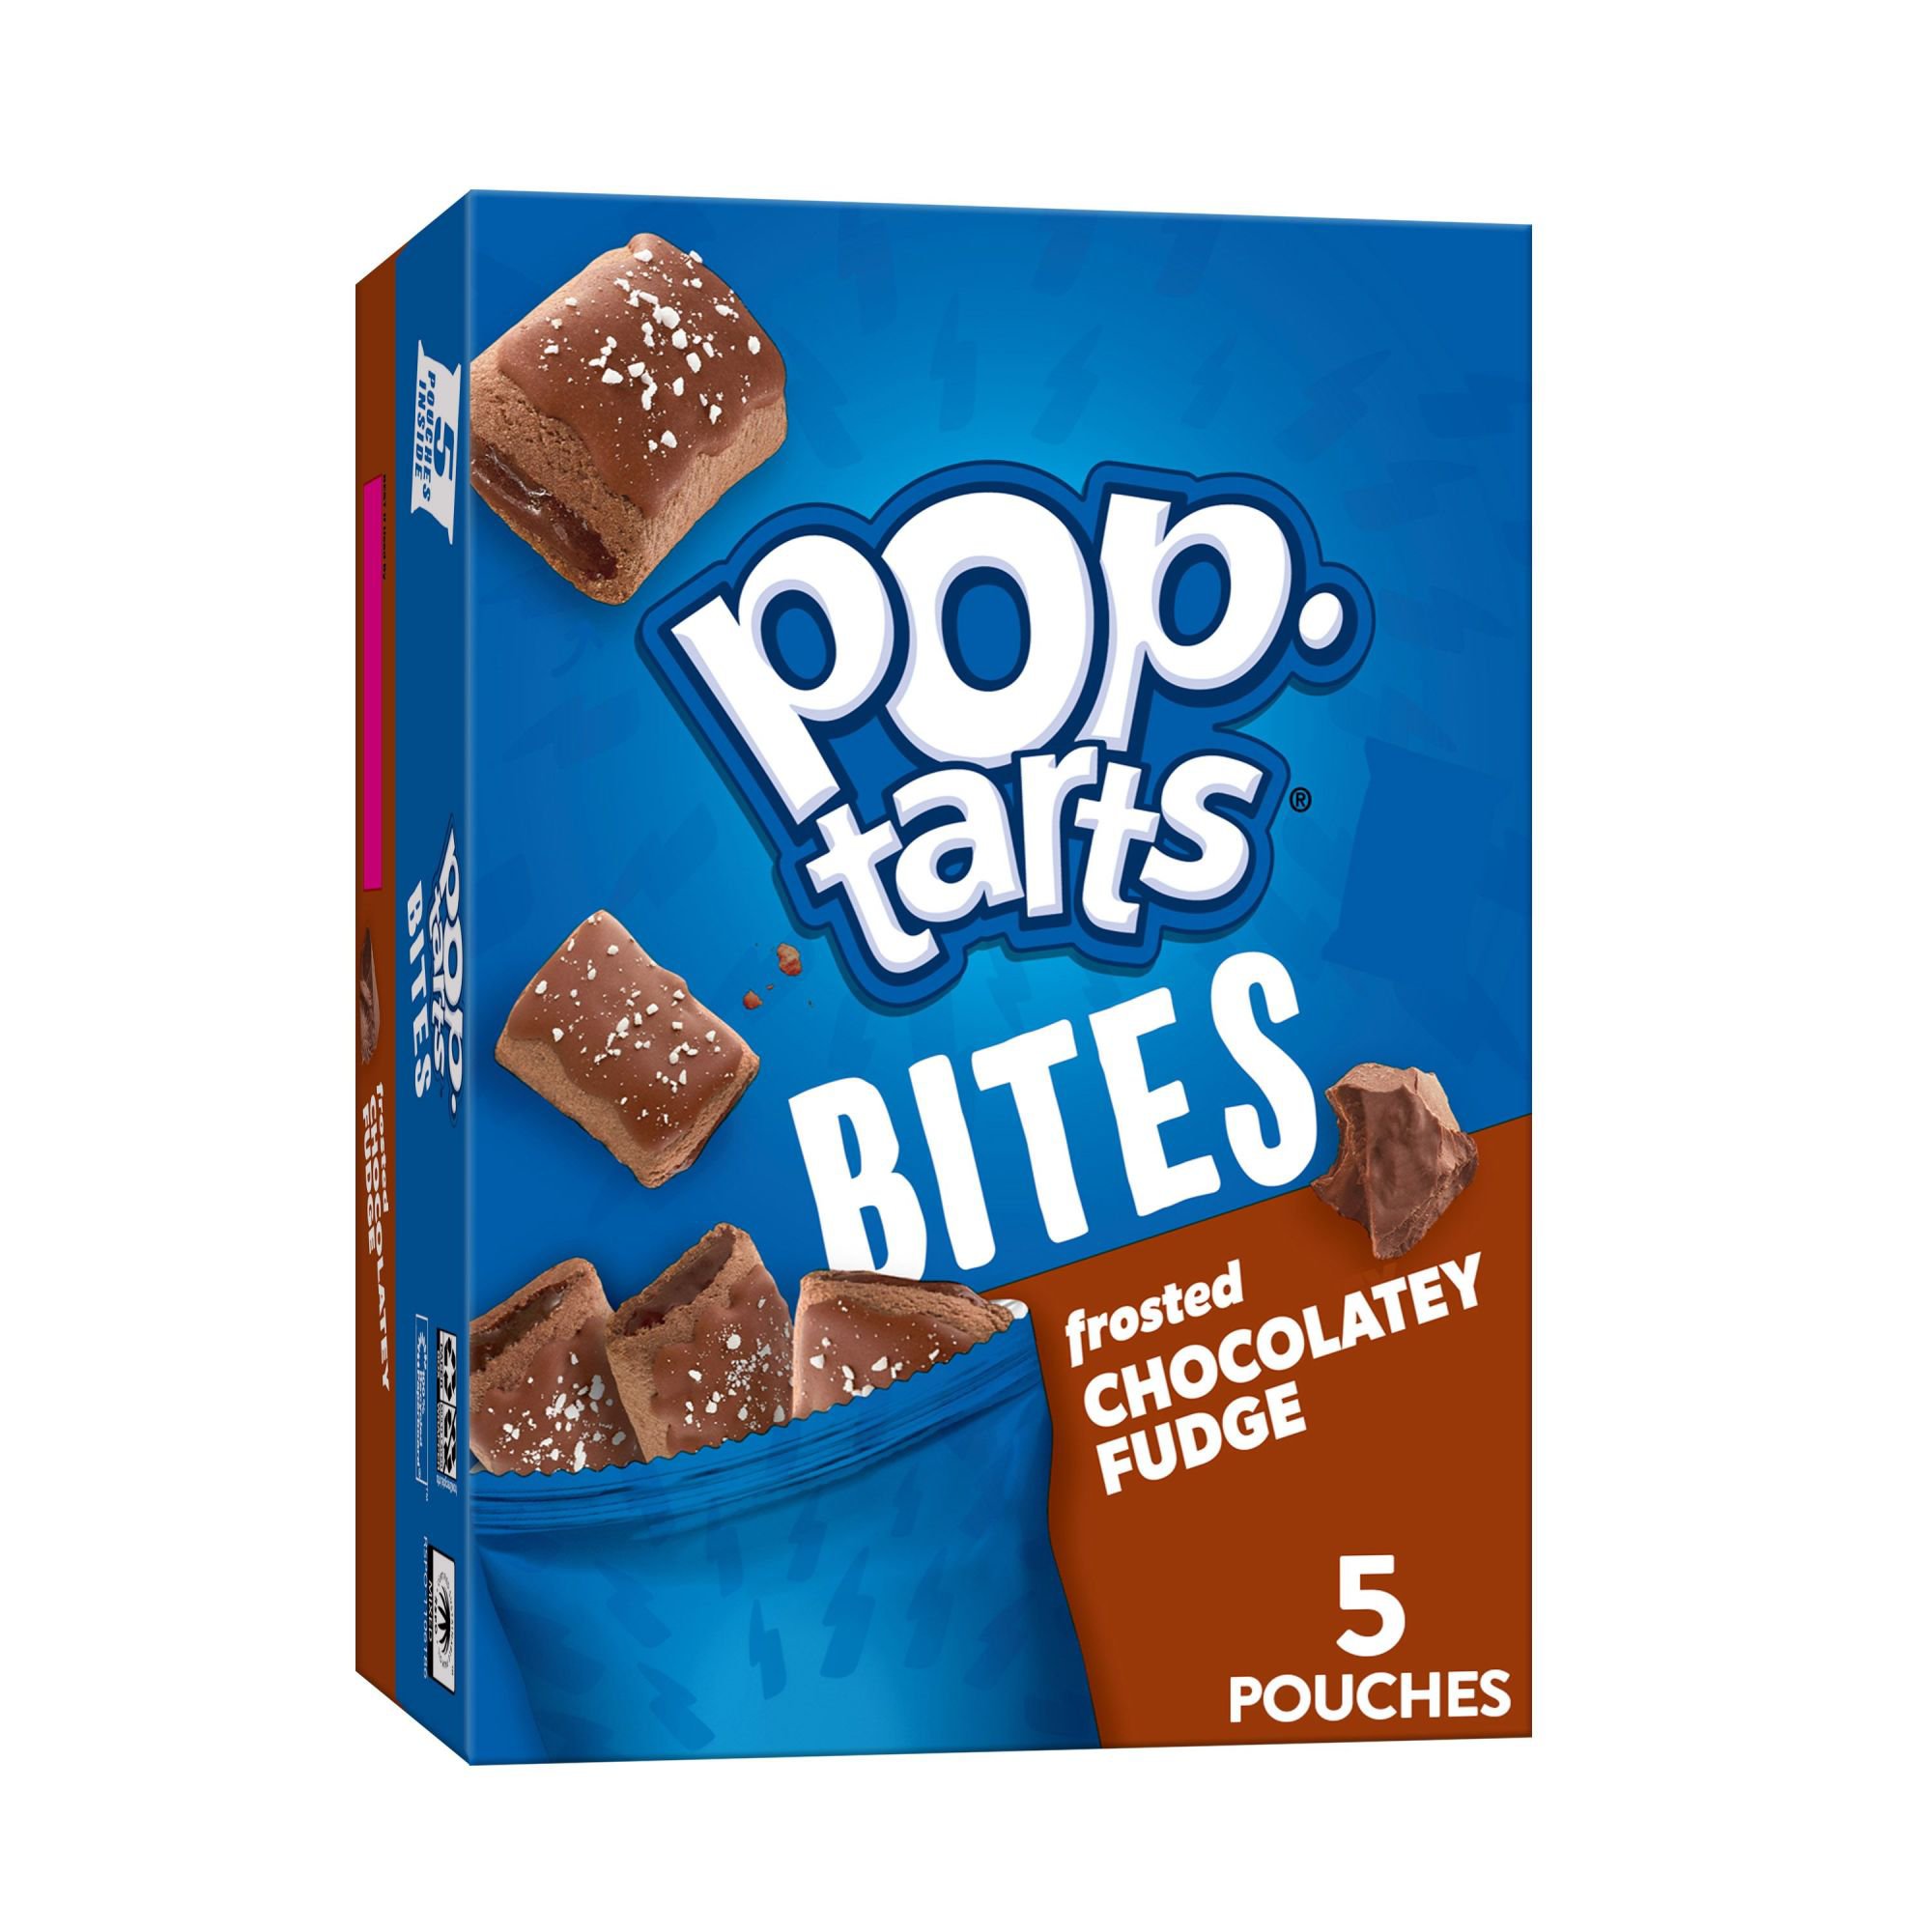 Pop Tarts Frosted Chocolatey Fudge Bites Shop Toaster Pastries At H E B